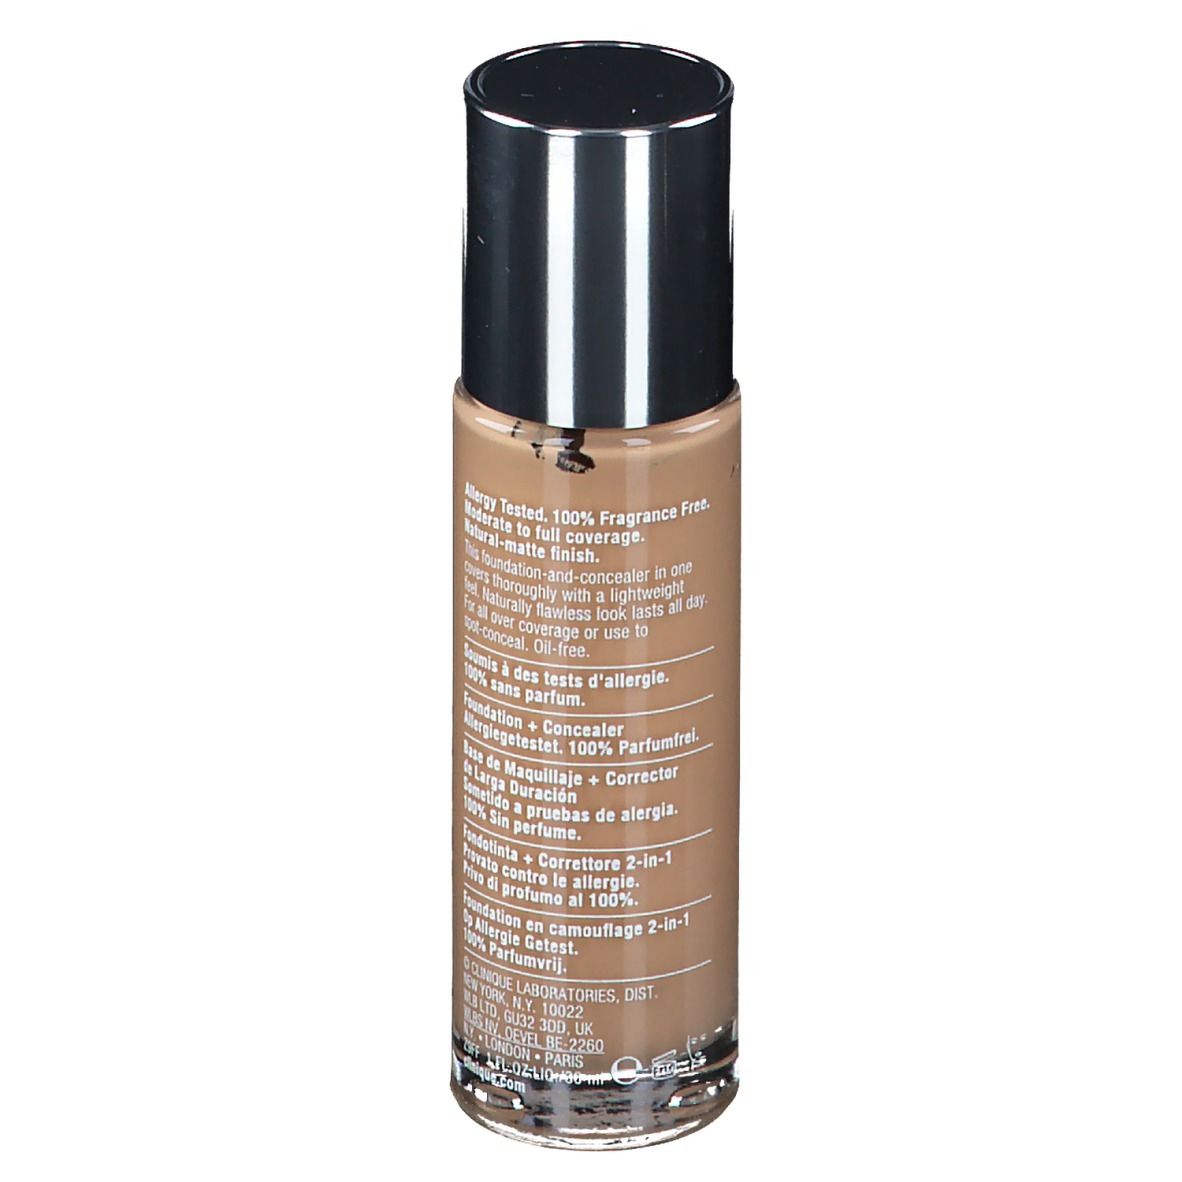 Clinique Beyond Perfecting Foundation + Concealer 09 Neutral